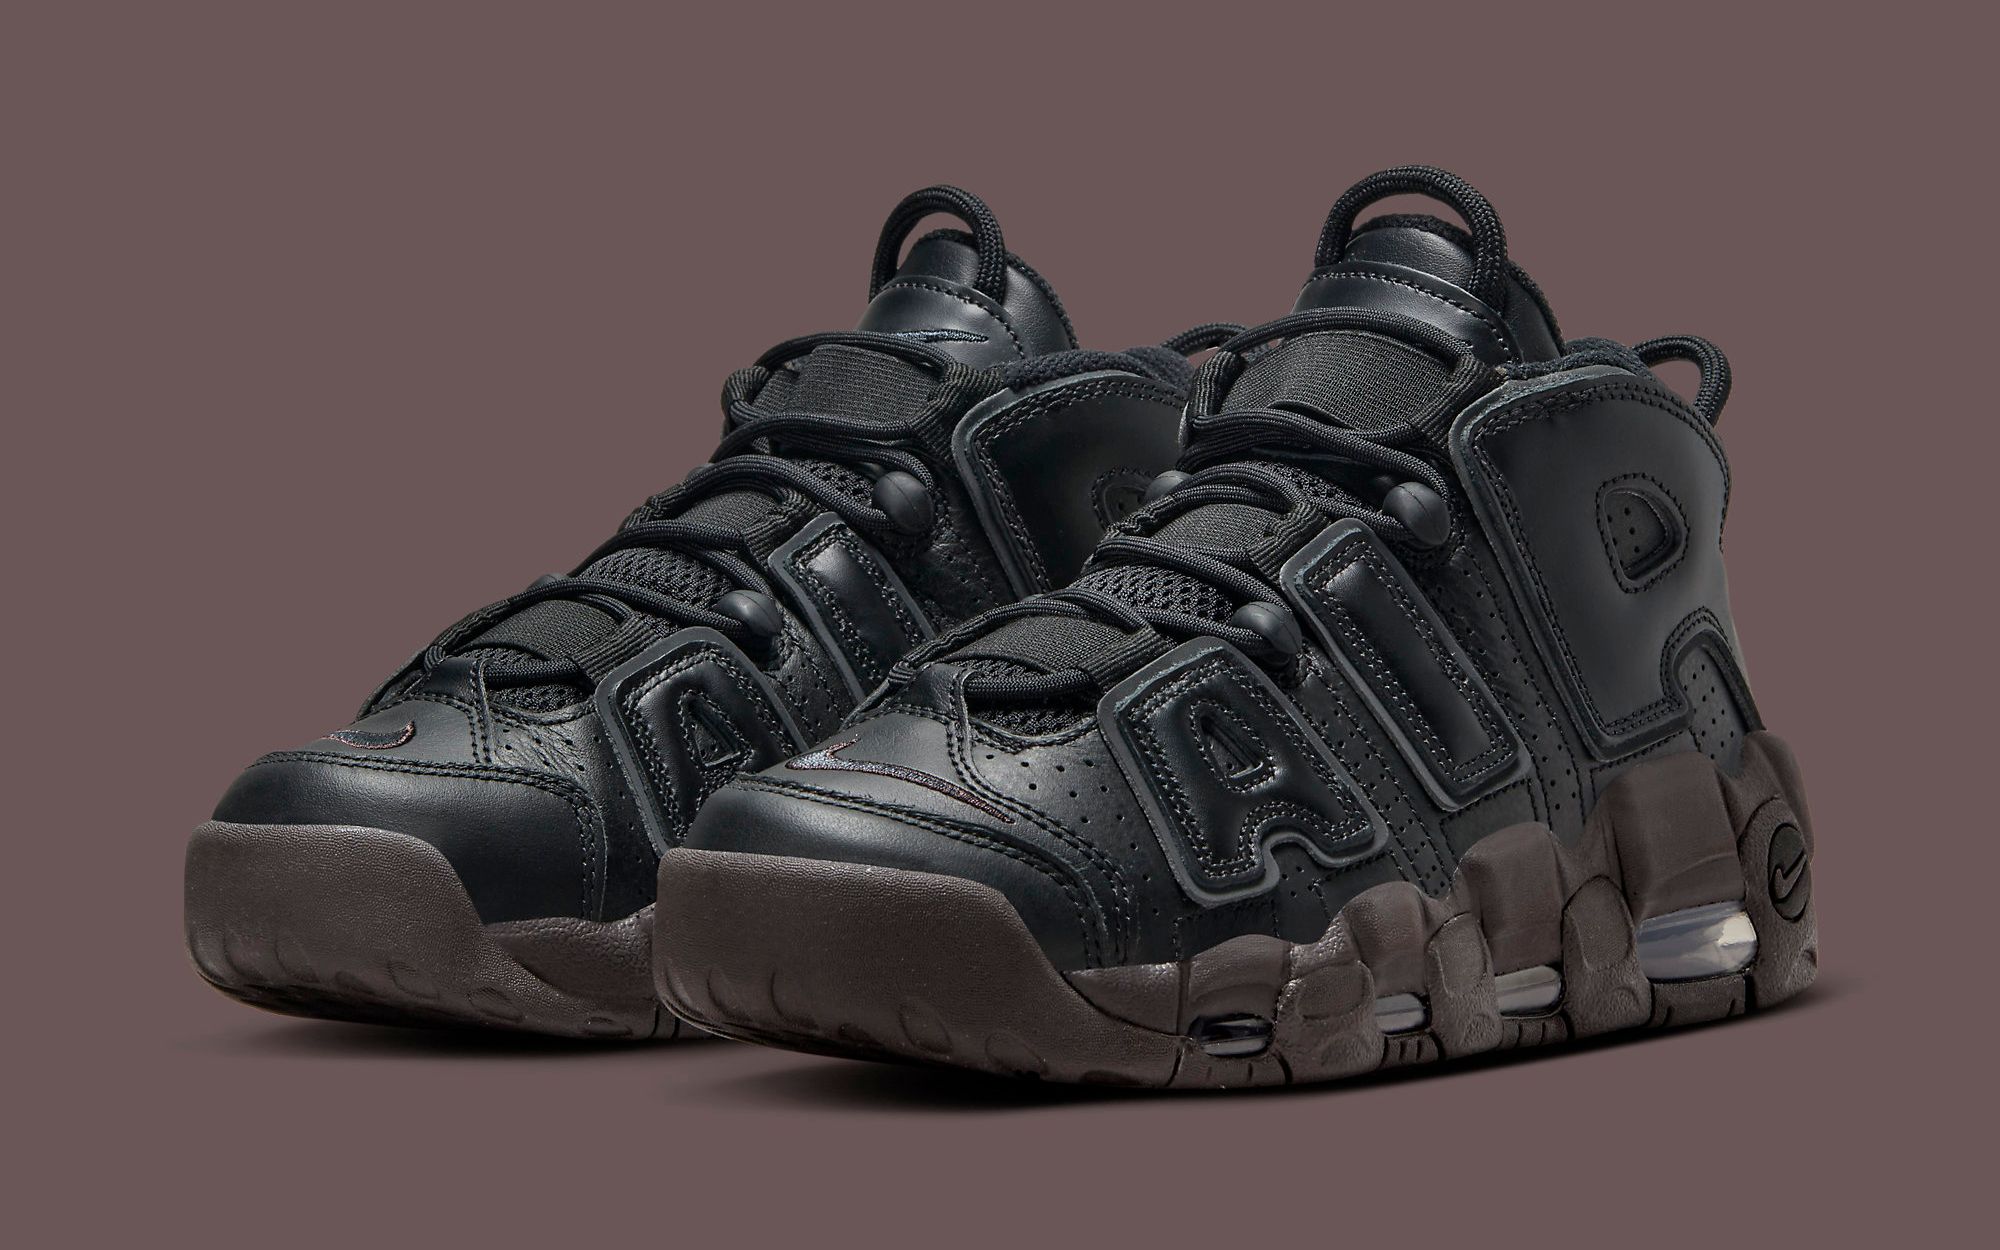 The Nike Air More Uptempo Boasts a New Black and Dark Gum Build